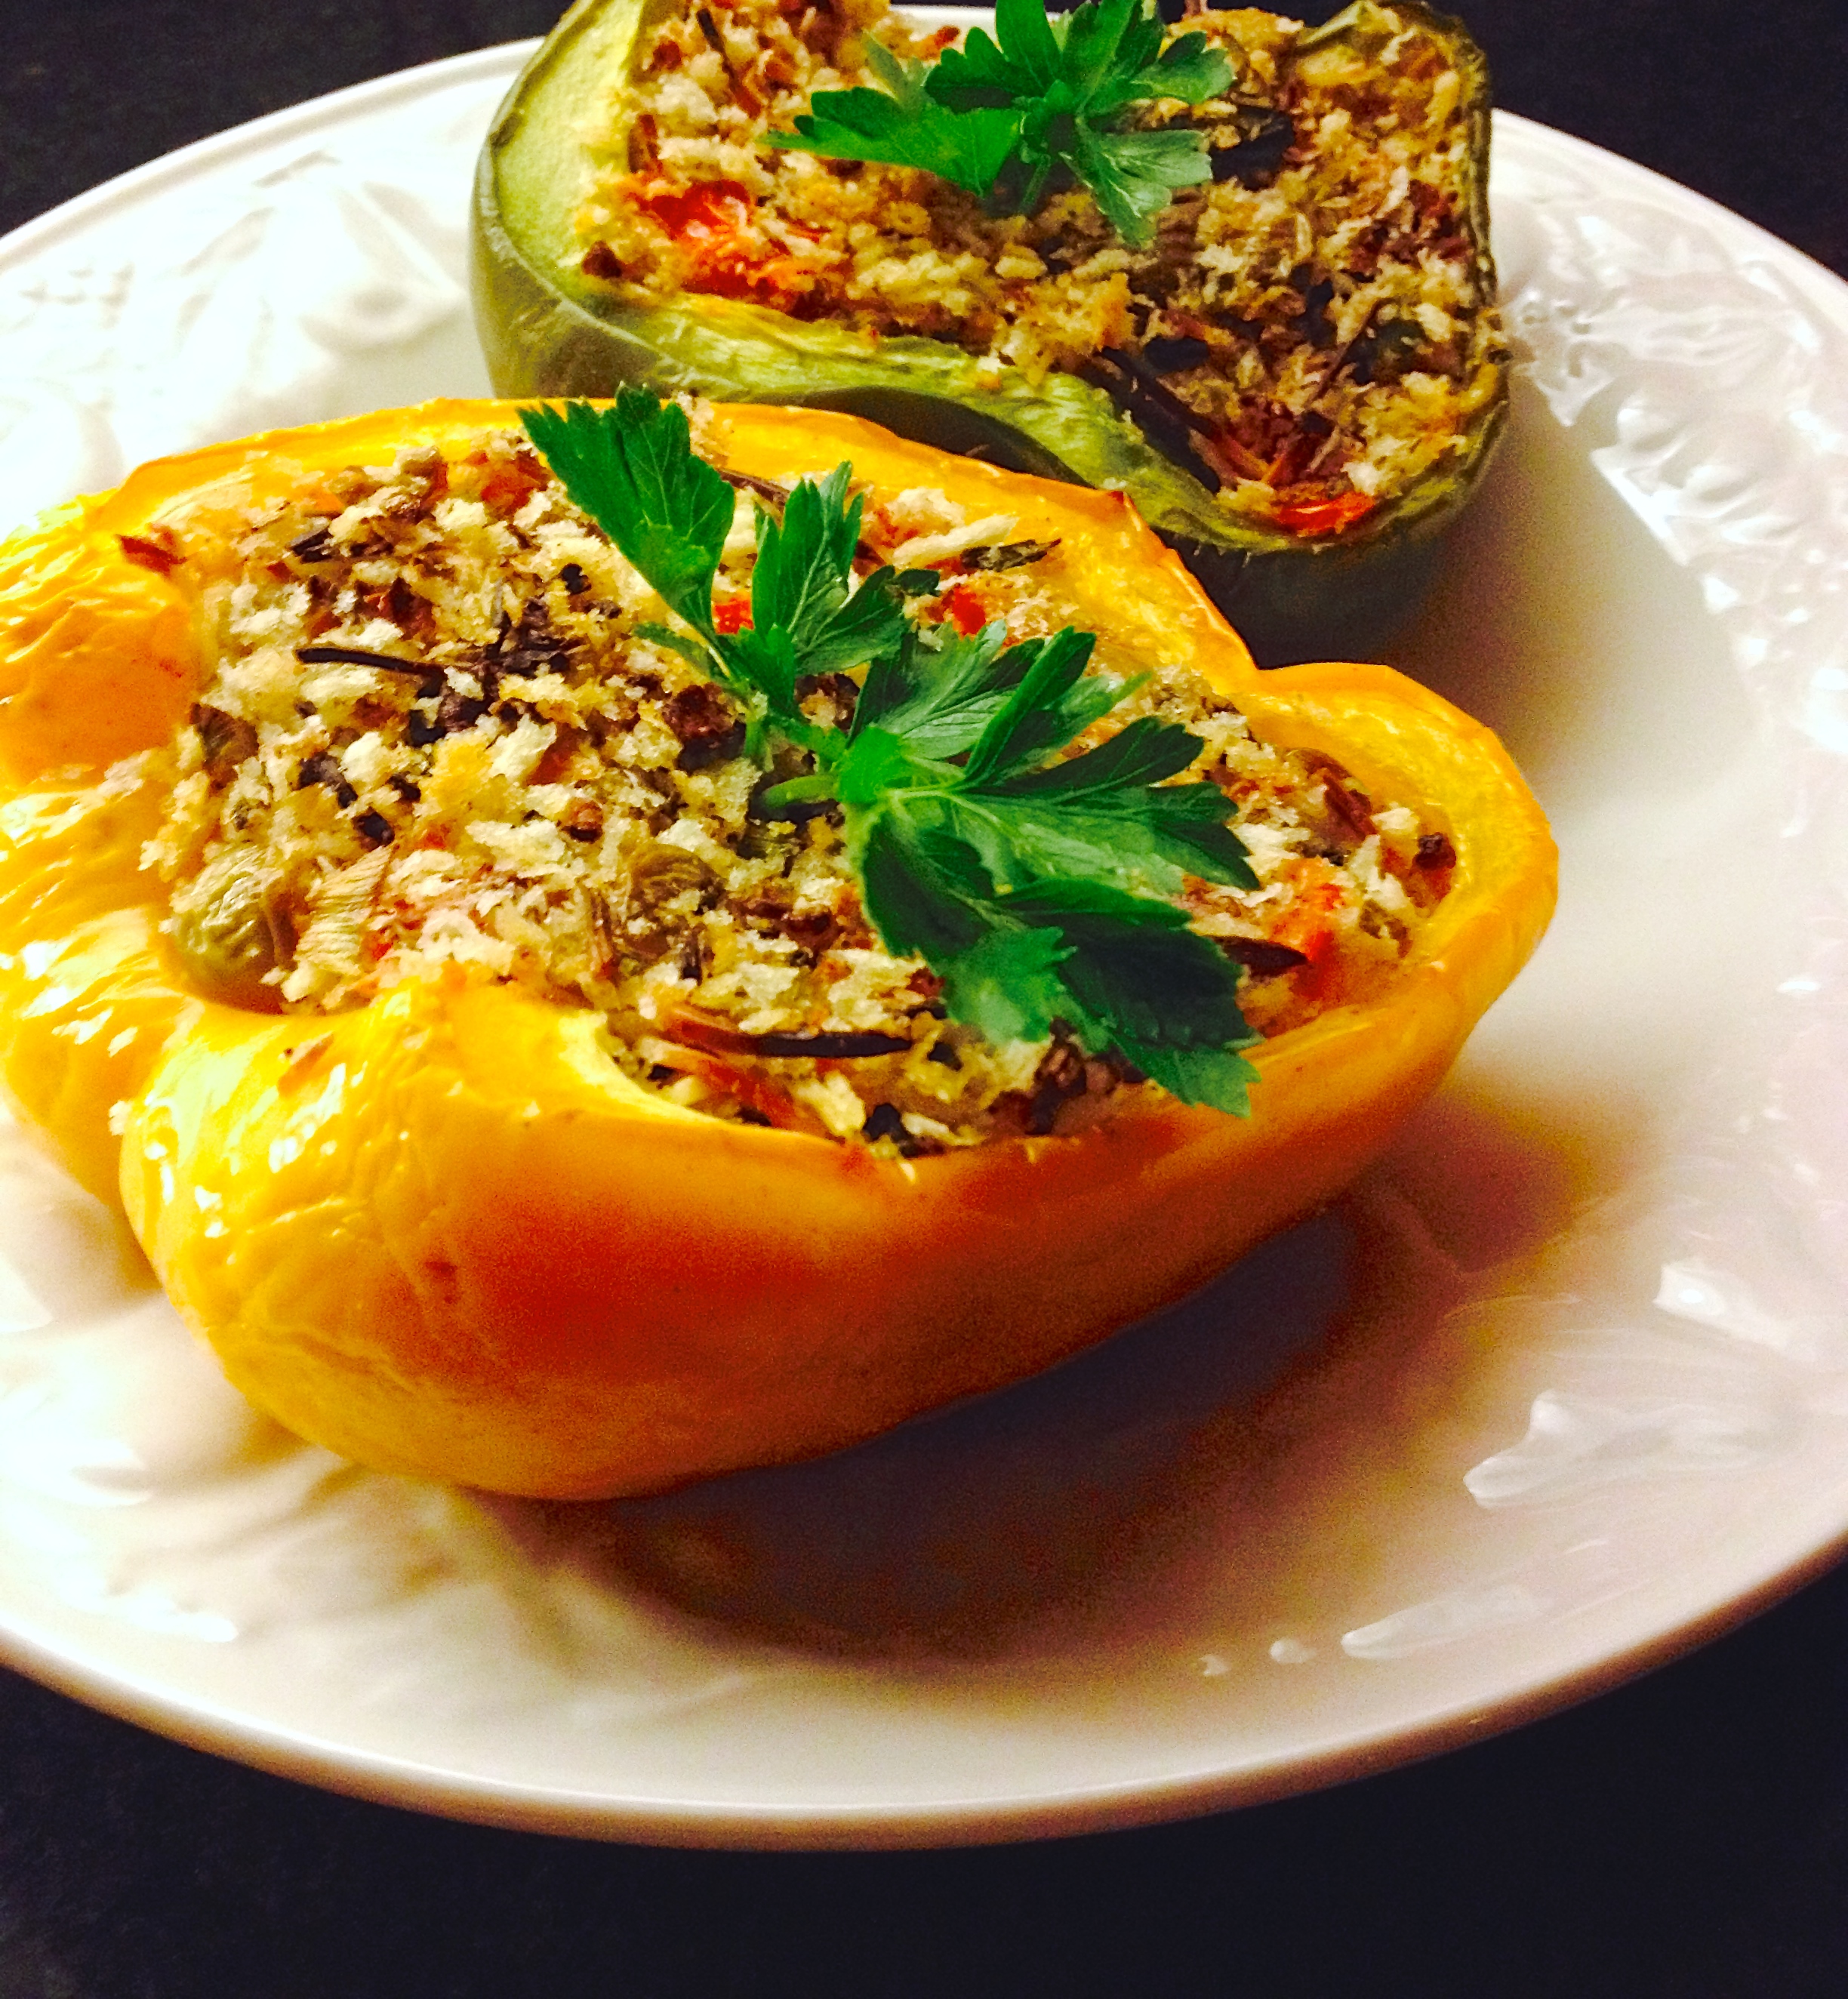 stuffed peppers with parmesan and olives :: by radish*rose